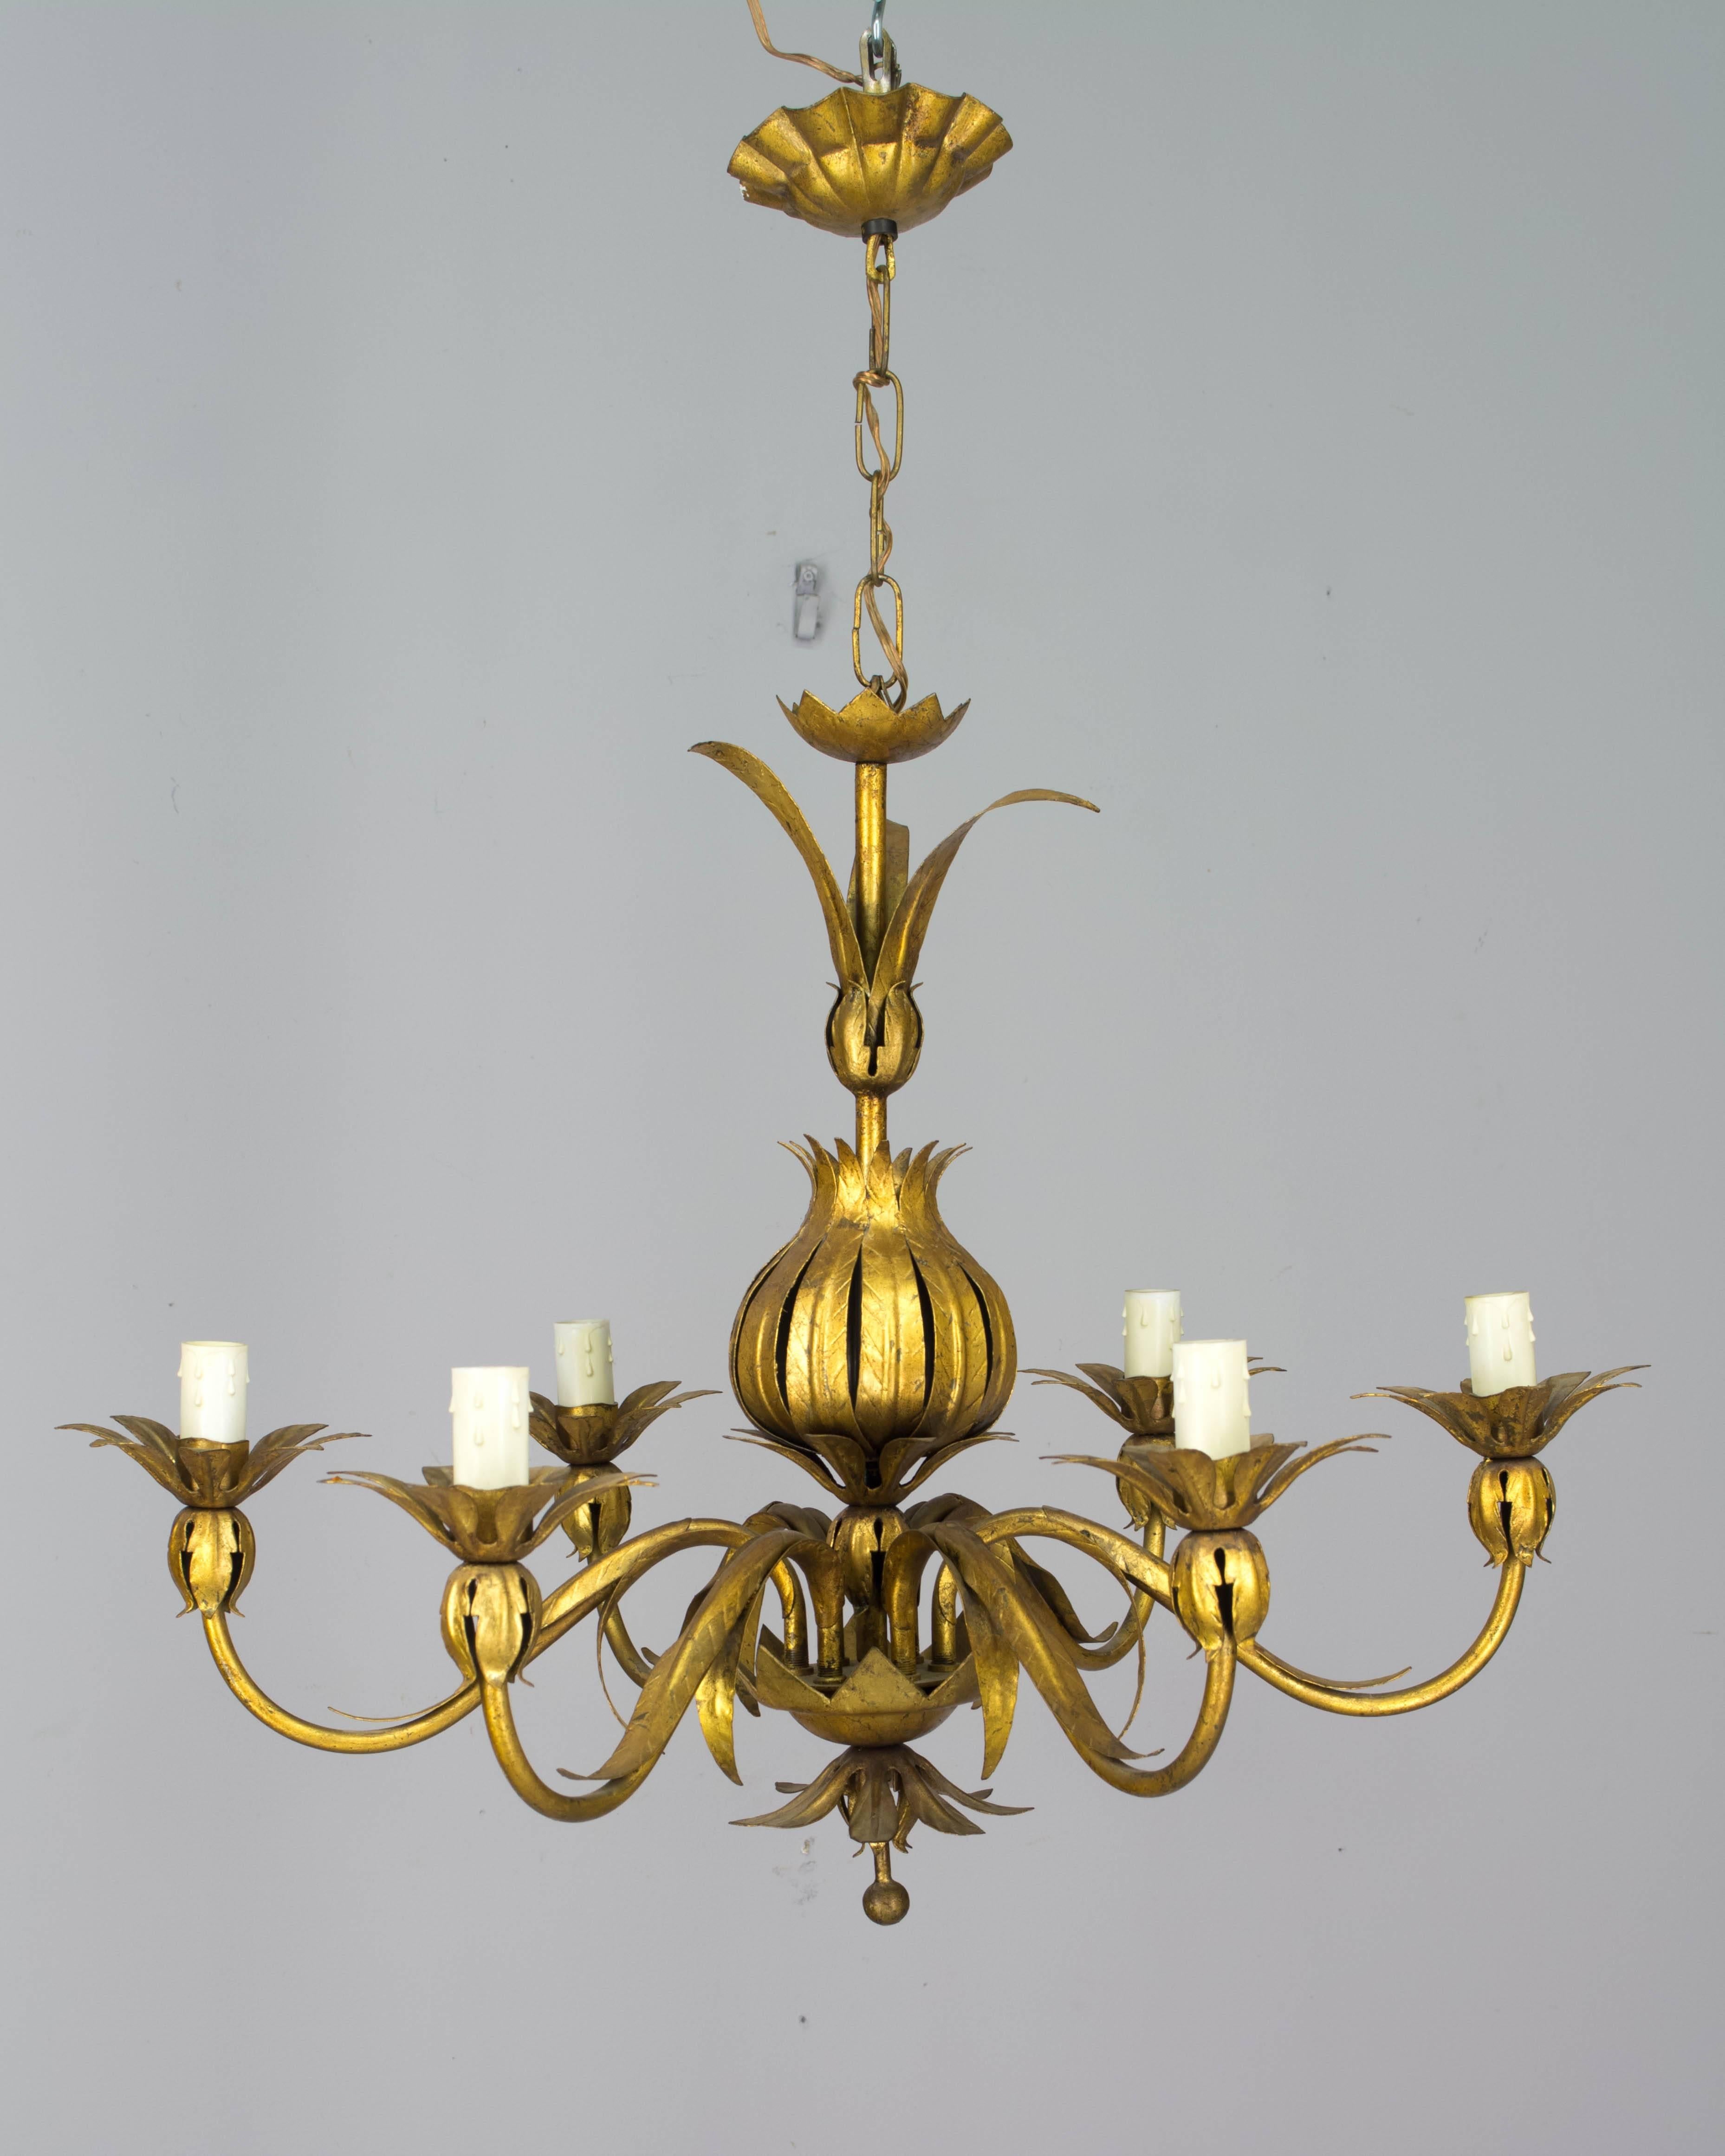 A Mid-Century Modern Italian gilded tole six-light chandelier. In very good condition with bright gilt. Original candle covers. Rewired with new sockets. Measures: 18